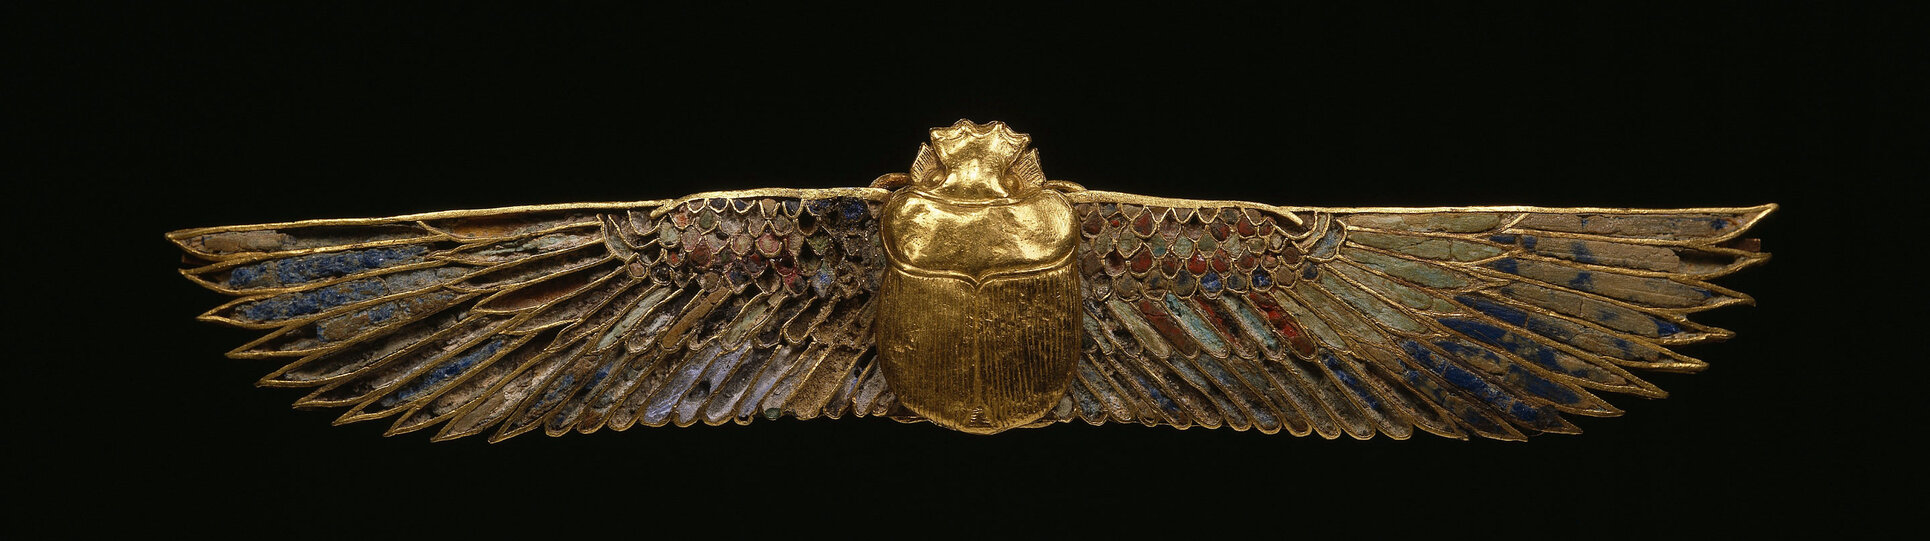 Golden figure of a scarab with bird’s wings